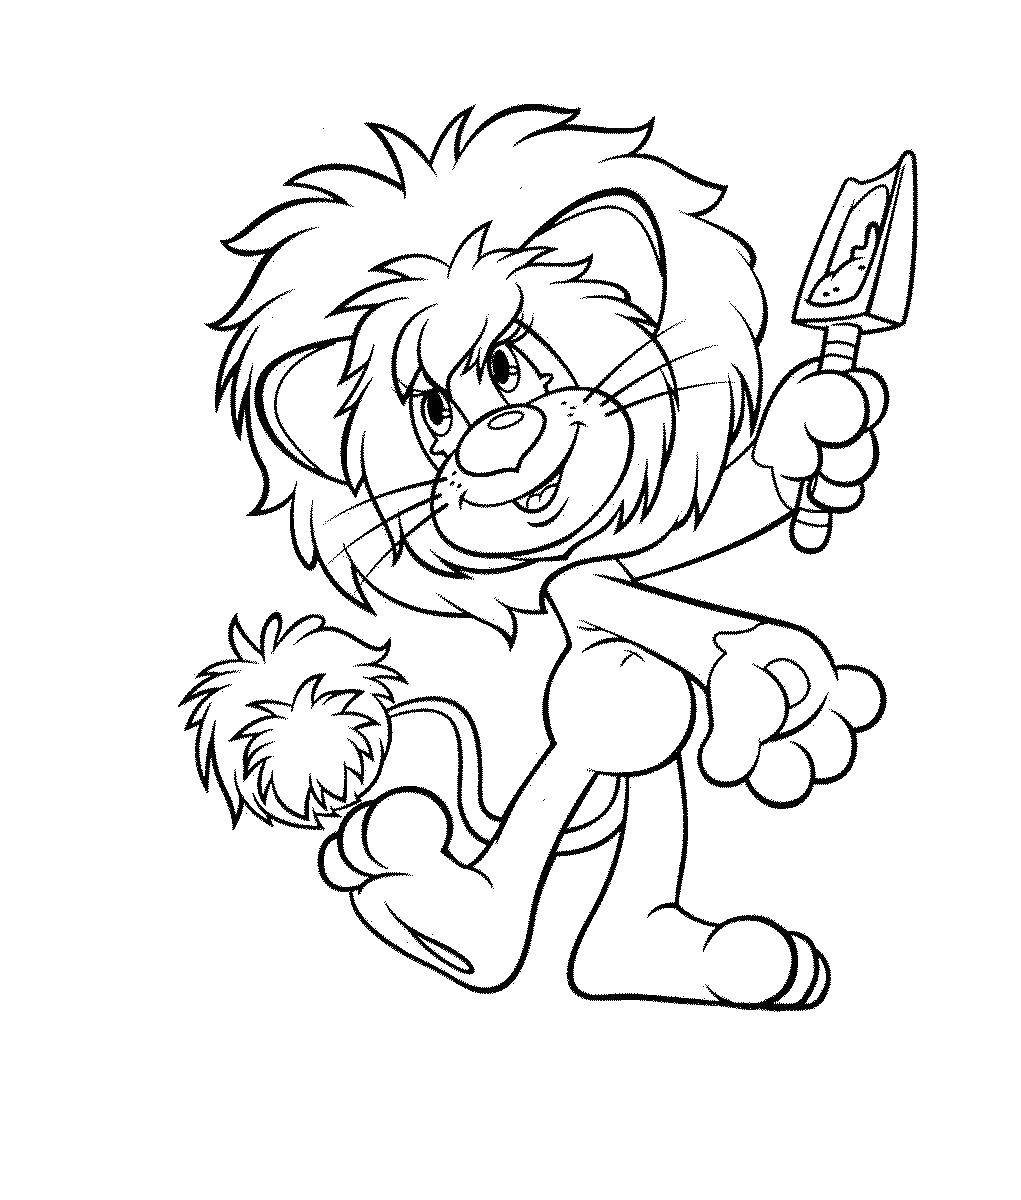 Coloring Lion. Category cartoons. Tags:  cartoons, turtle, lion.